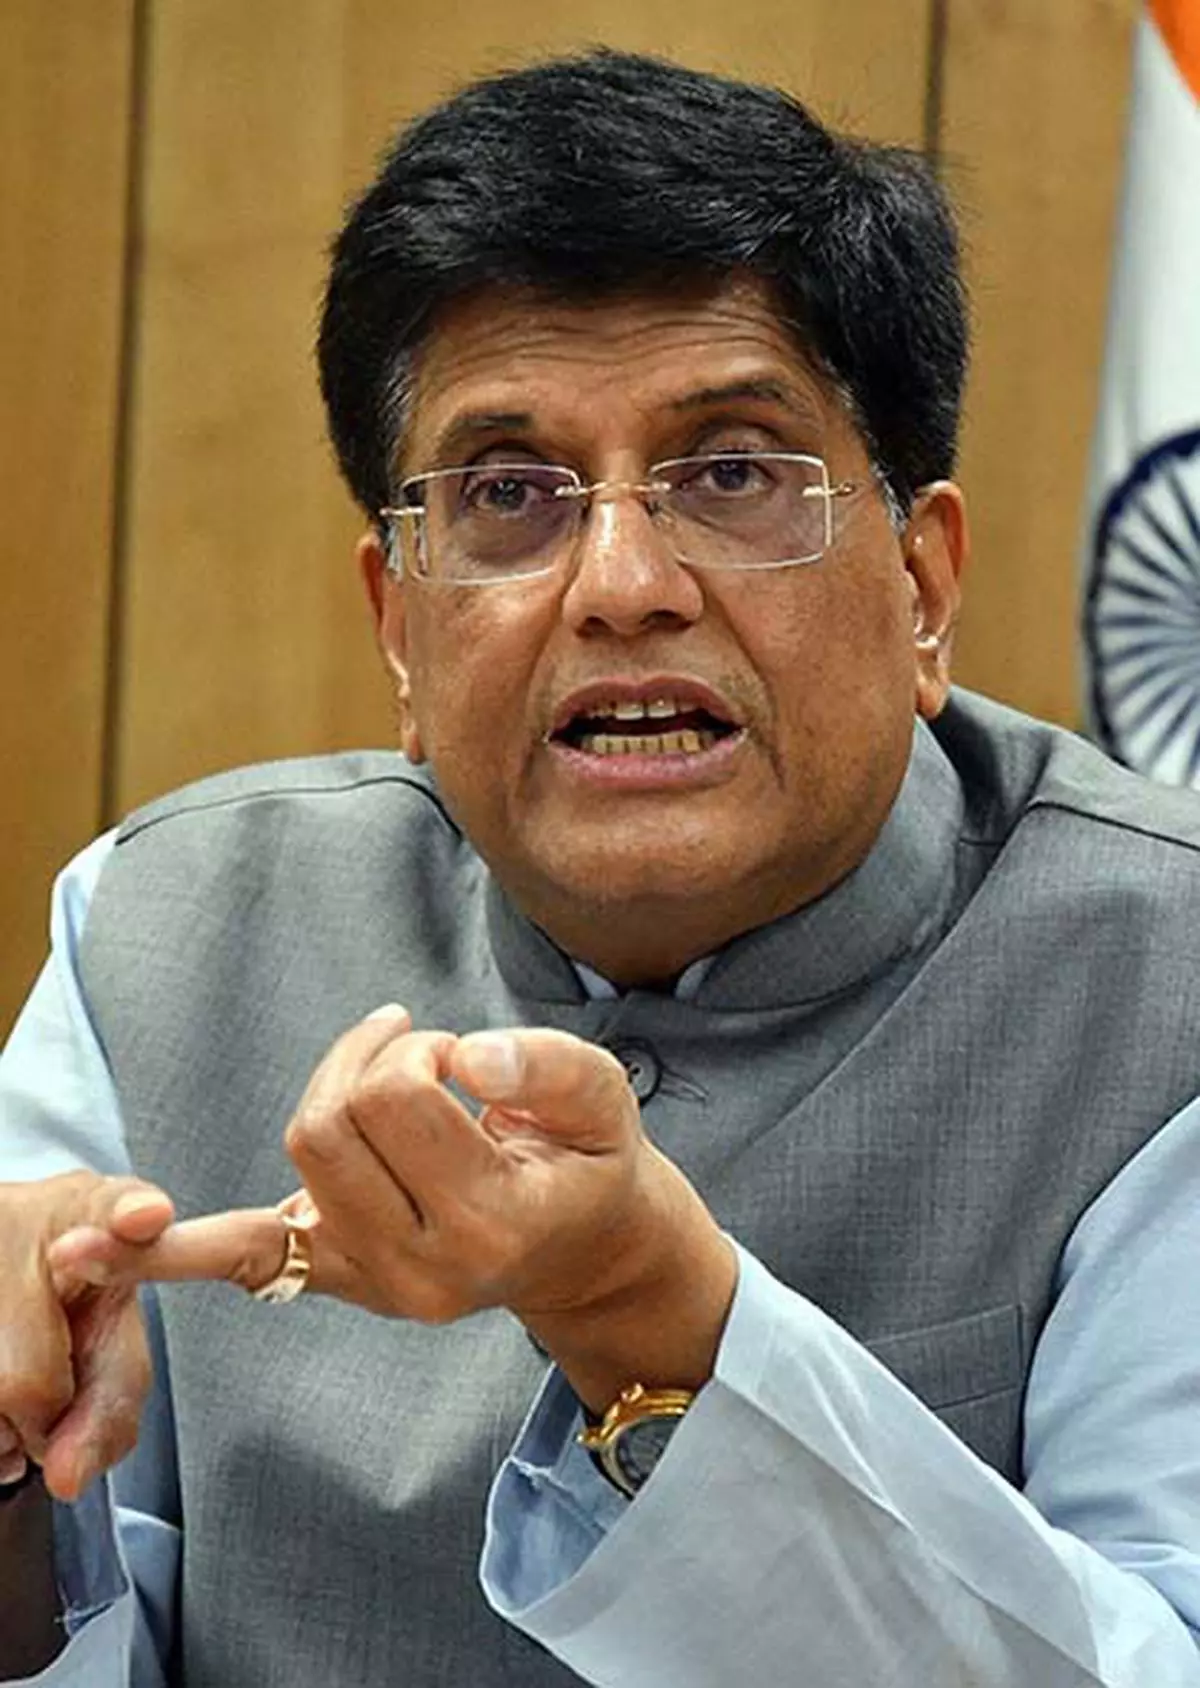 B.LINE: Piyush Goyal,Textile Commerce and Industry addressing a press confrence, in New Delhi, on 13.4.22 Pic : Kamal Narang